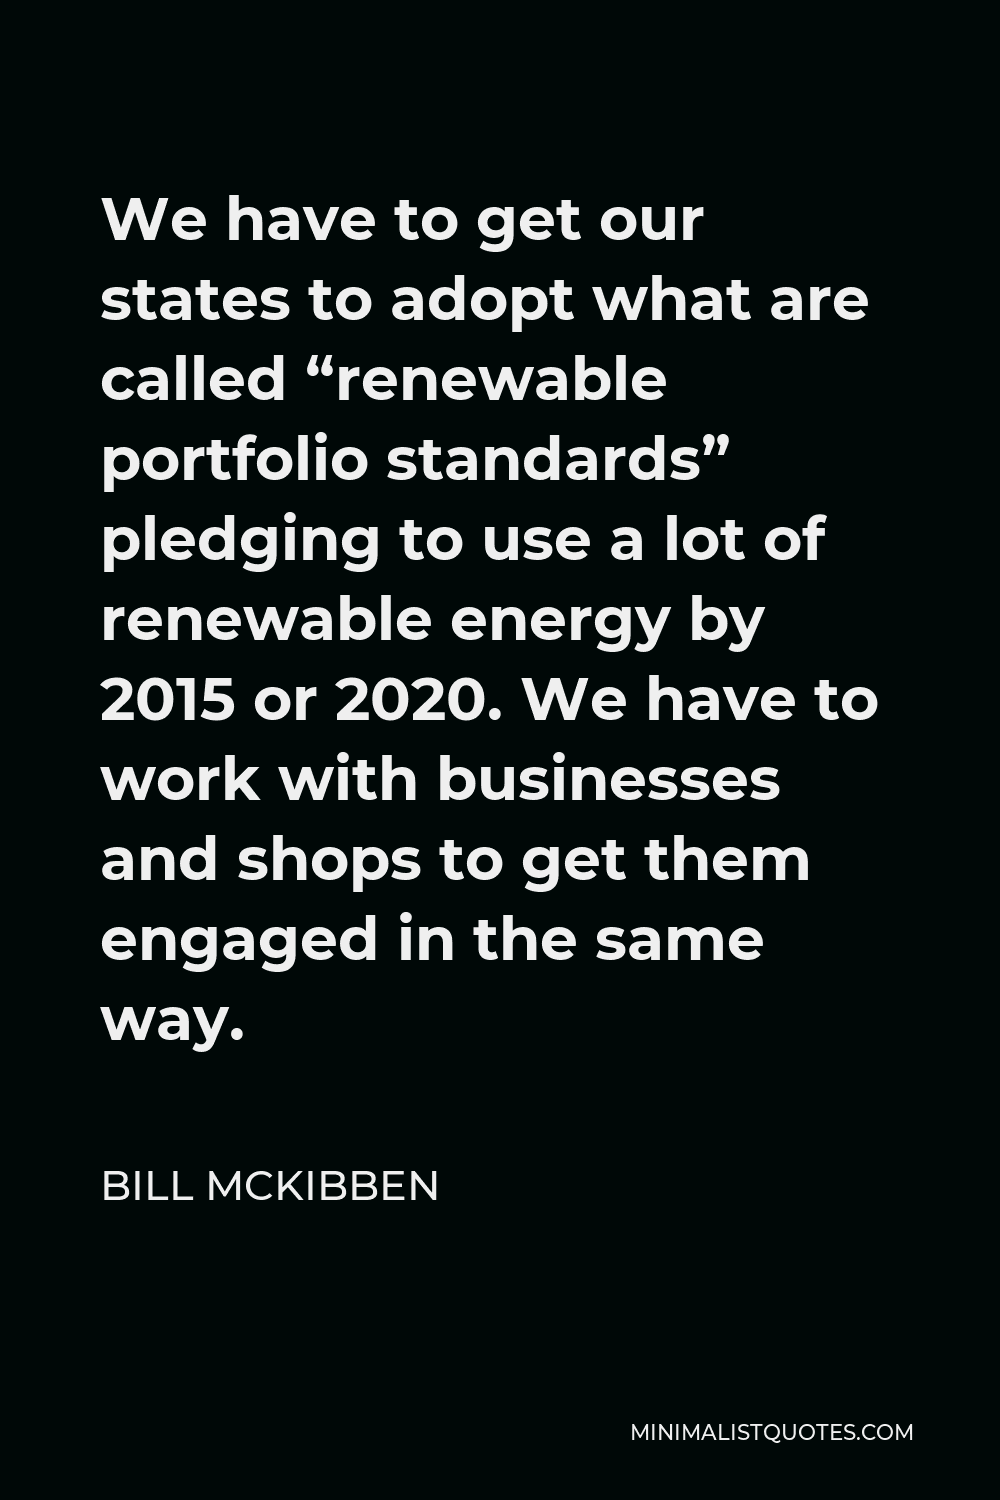 Bill McKibben Quote - We have to get our states to adopt what are called “renewable portfolio standards” pledging to use a lot of renewable energy by 2015 or 2020. We have to work with businesses and shops to get them engaged in the same way.